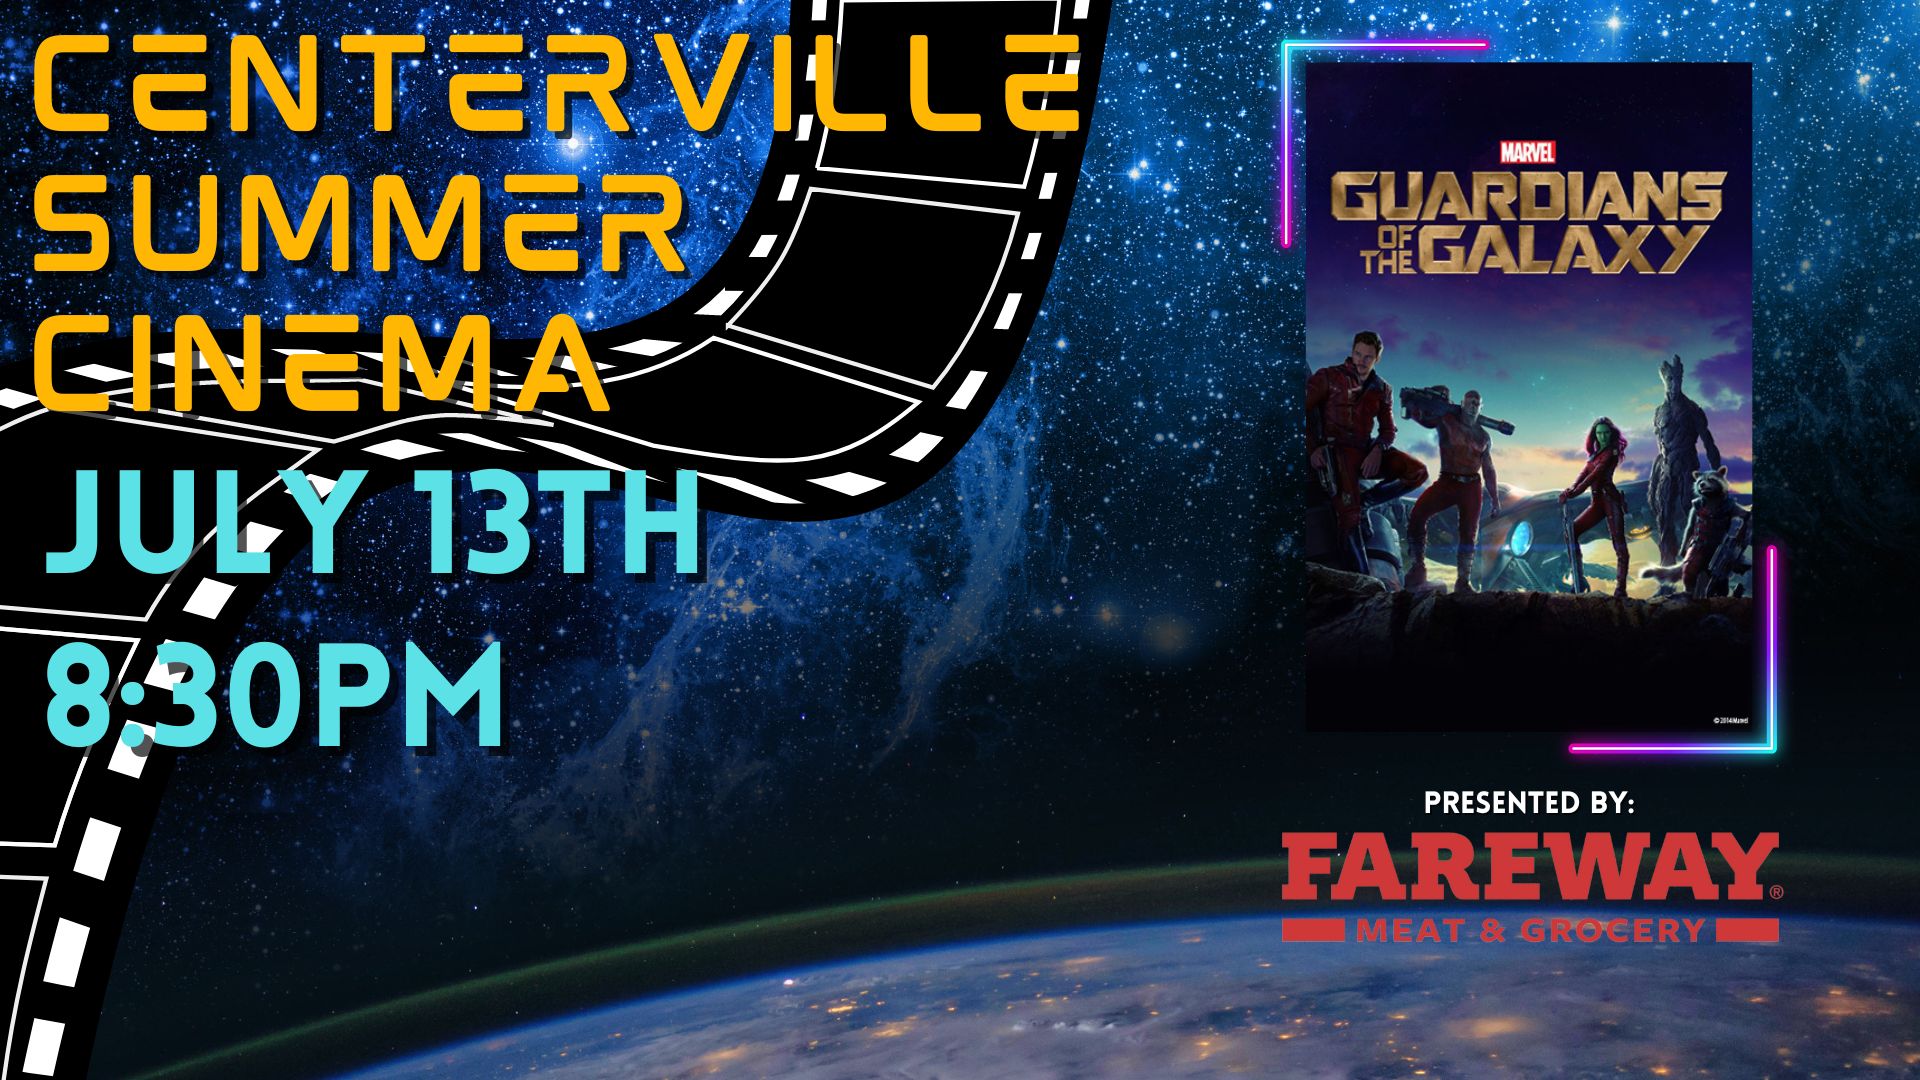 guardians of the galaxy summer cinema promotional image